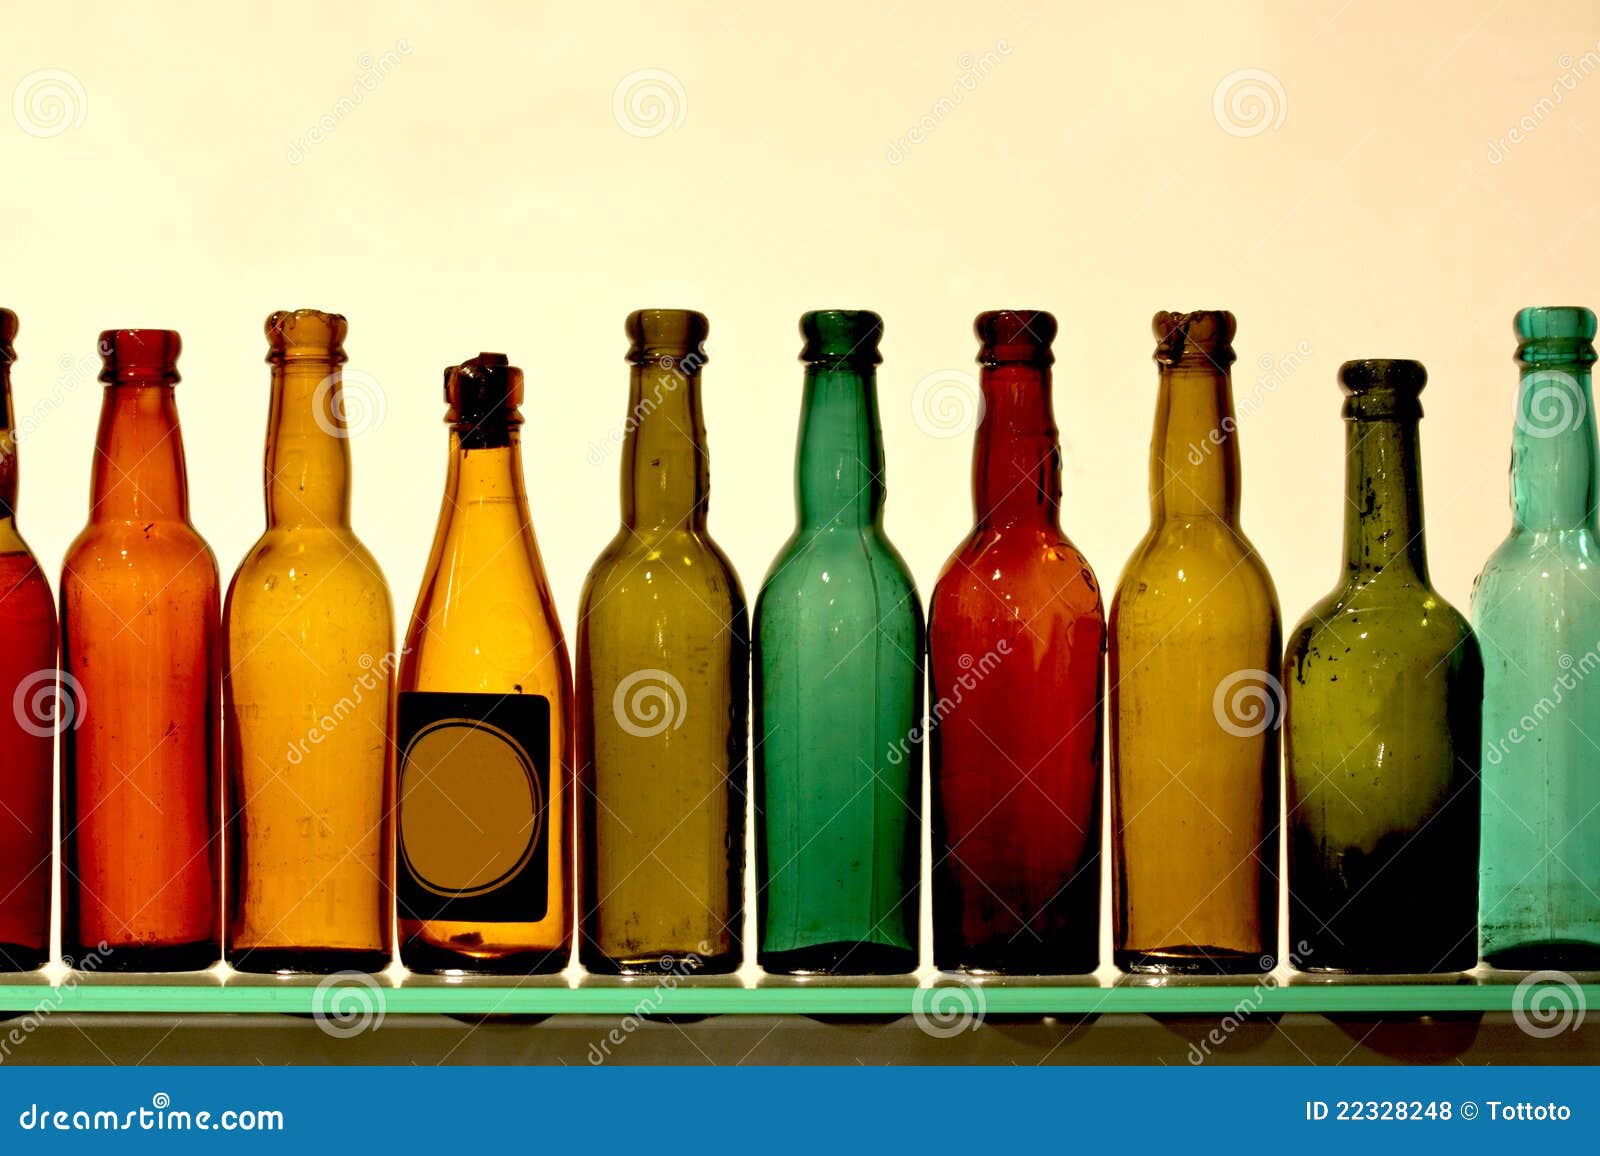 2,273,889 Bottle Glass Royalty-Free Images, Stock Photos